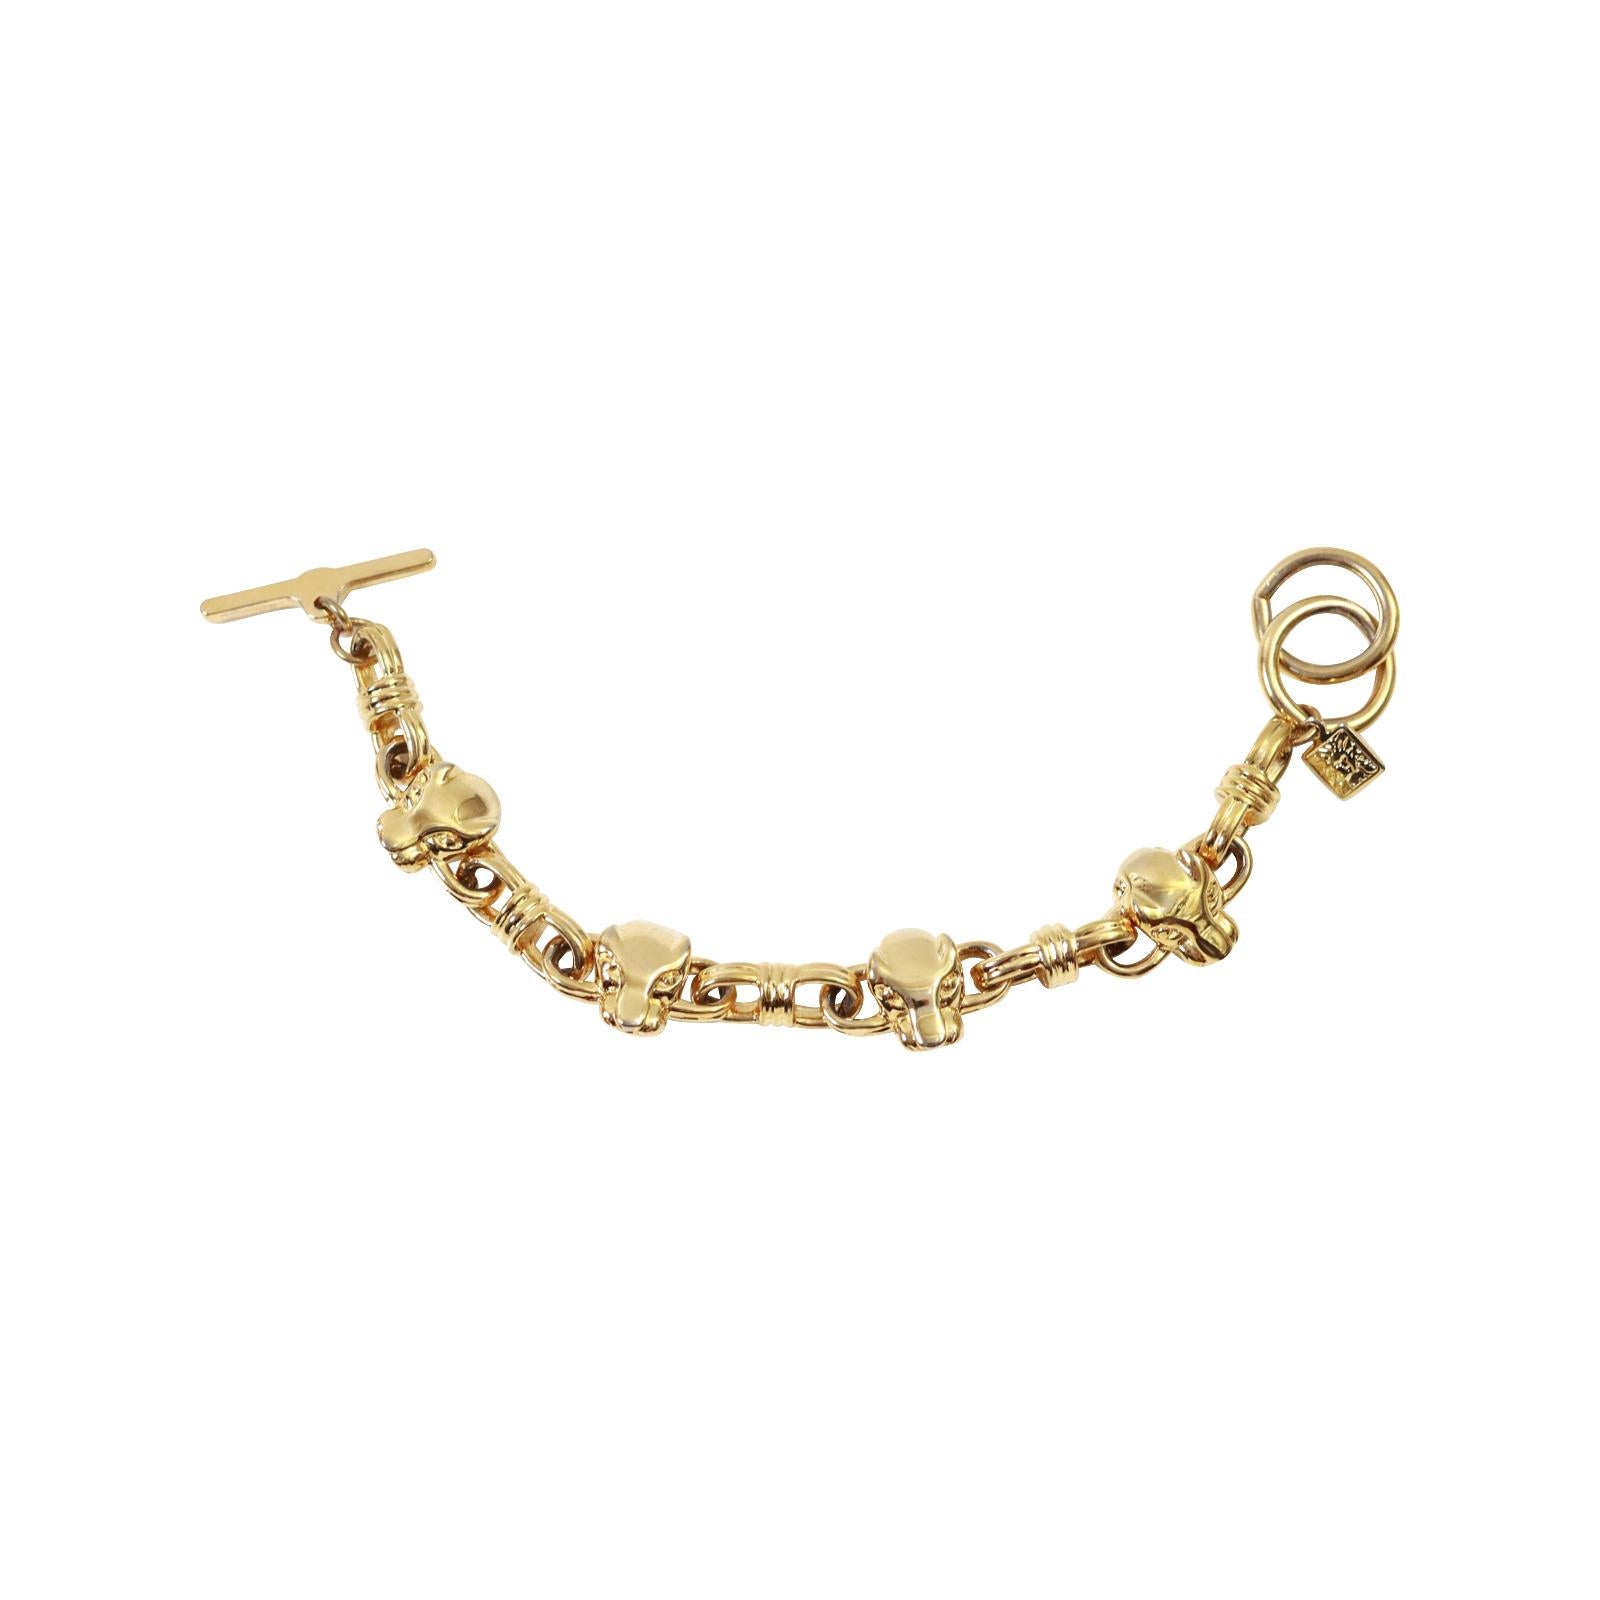 Vintage Anne Klein Gold tone Panther Toggle Bracelet Circa 1990s.  These are like secrets from the 1980s/1990s.  They are well made and were made during the period that are so chic.  Anne Klein jewelry was so well made and so sought after during the